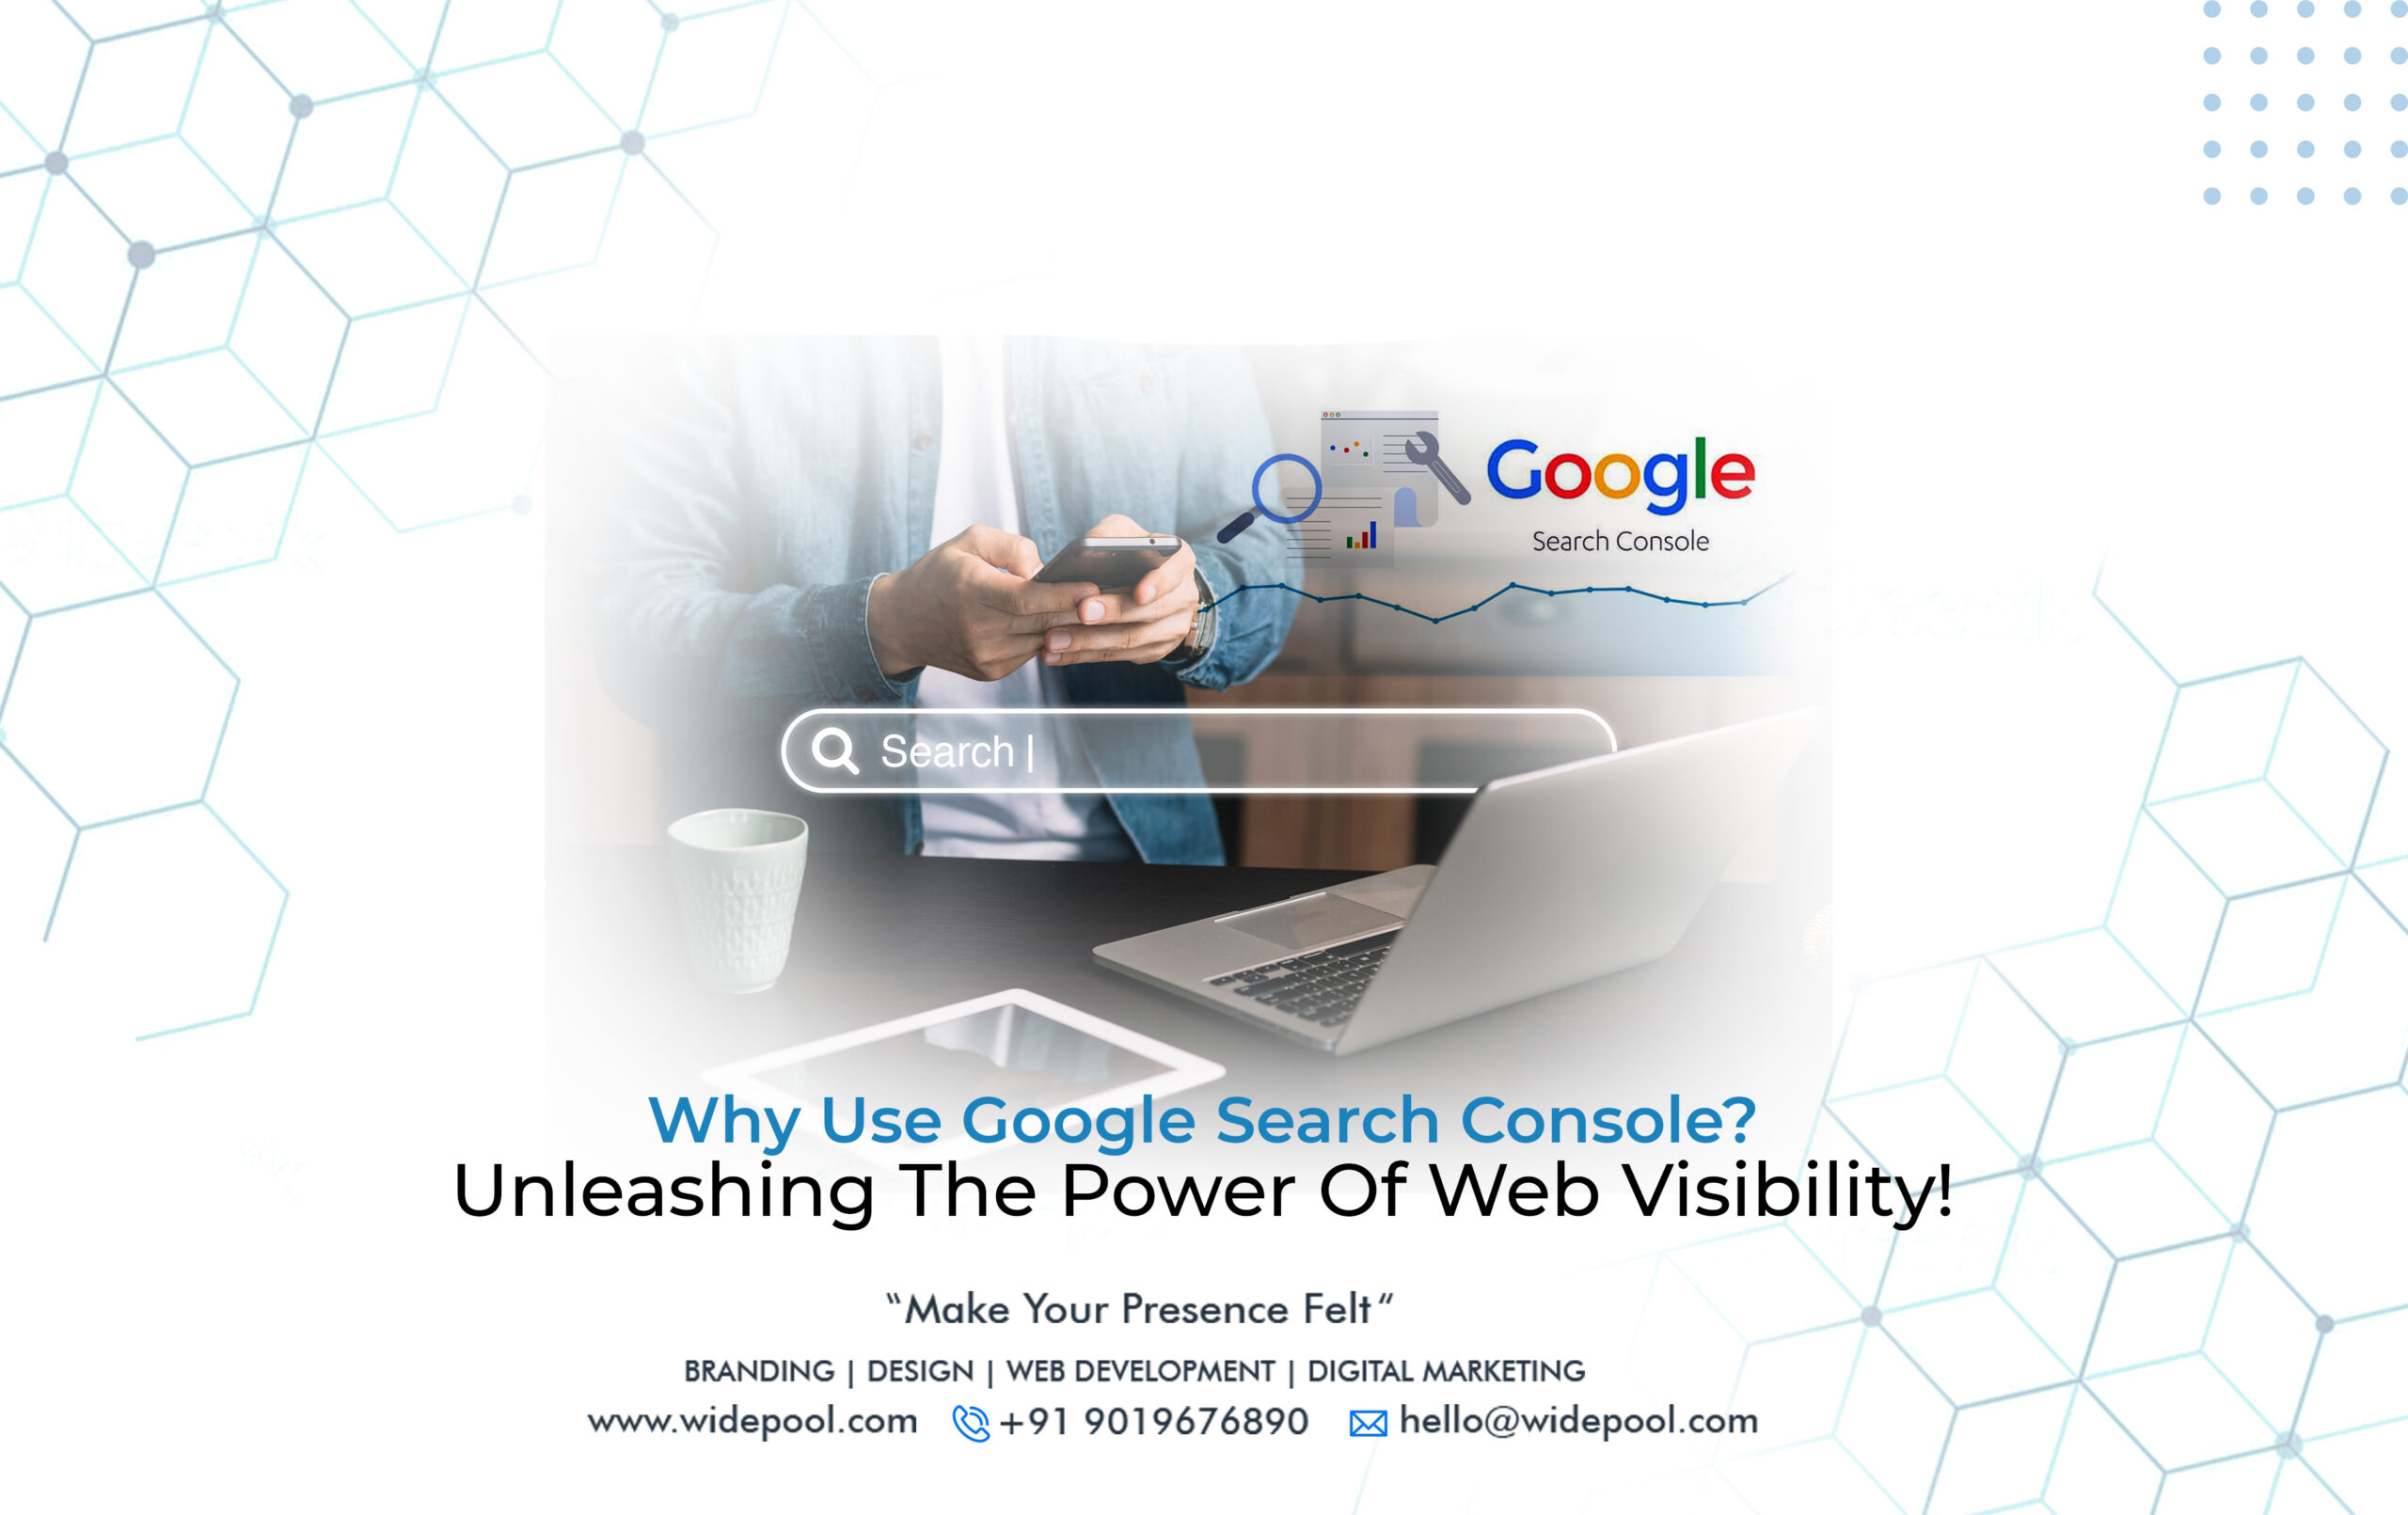 Why Use Google Search Console? Unleashing the Power of Web Visibility!